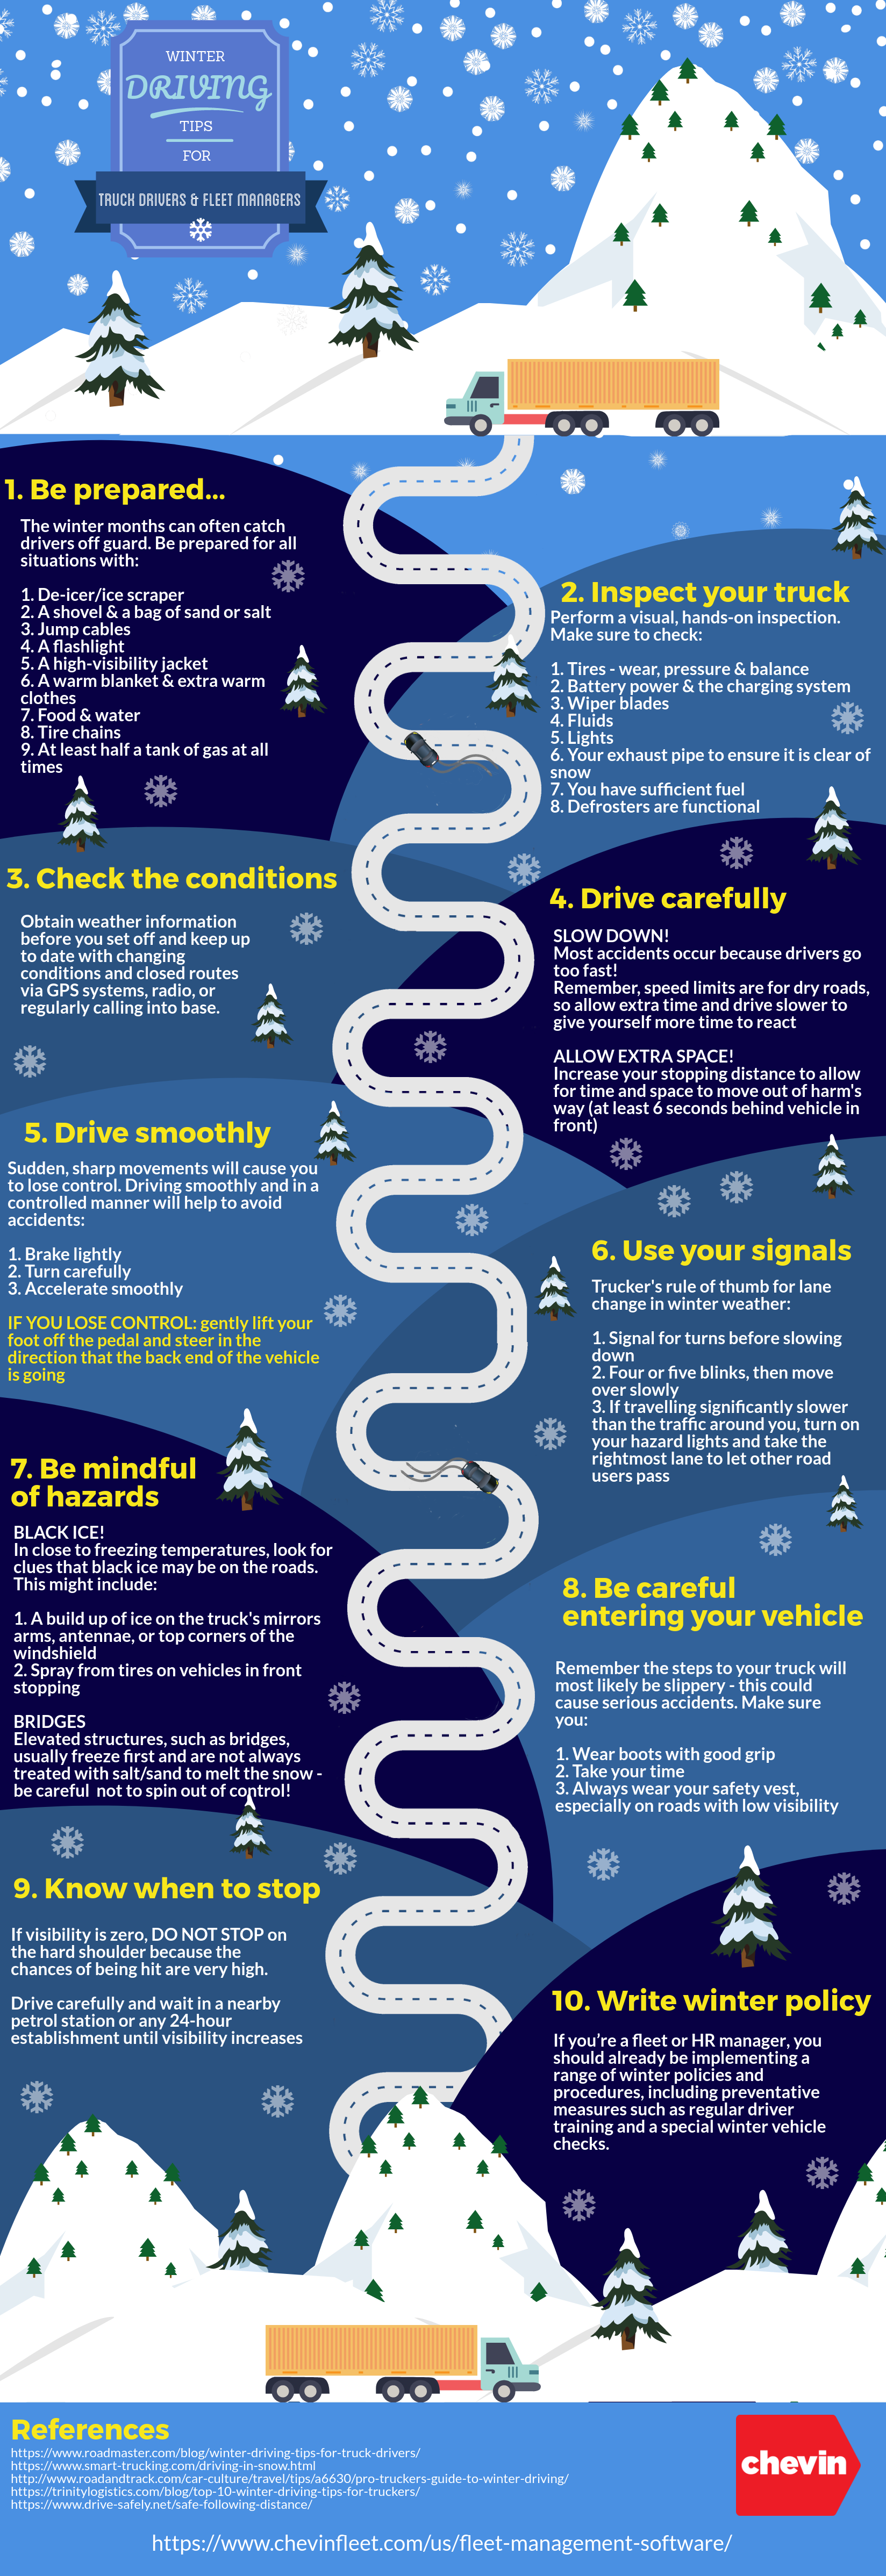 winter driving tips for truck drivers and fleet managers infographic